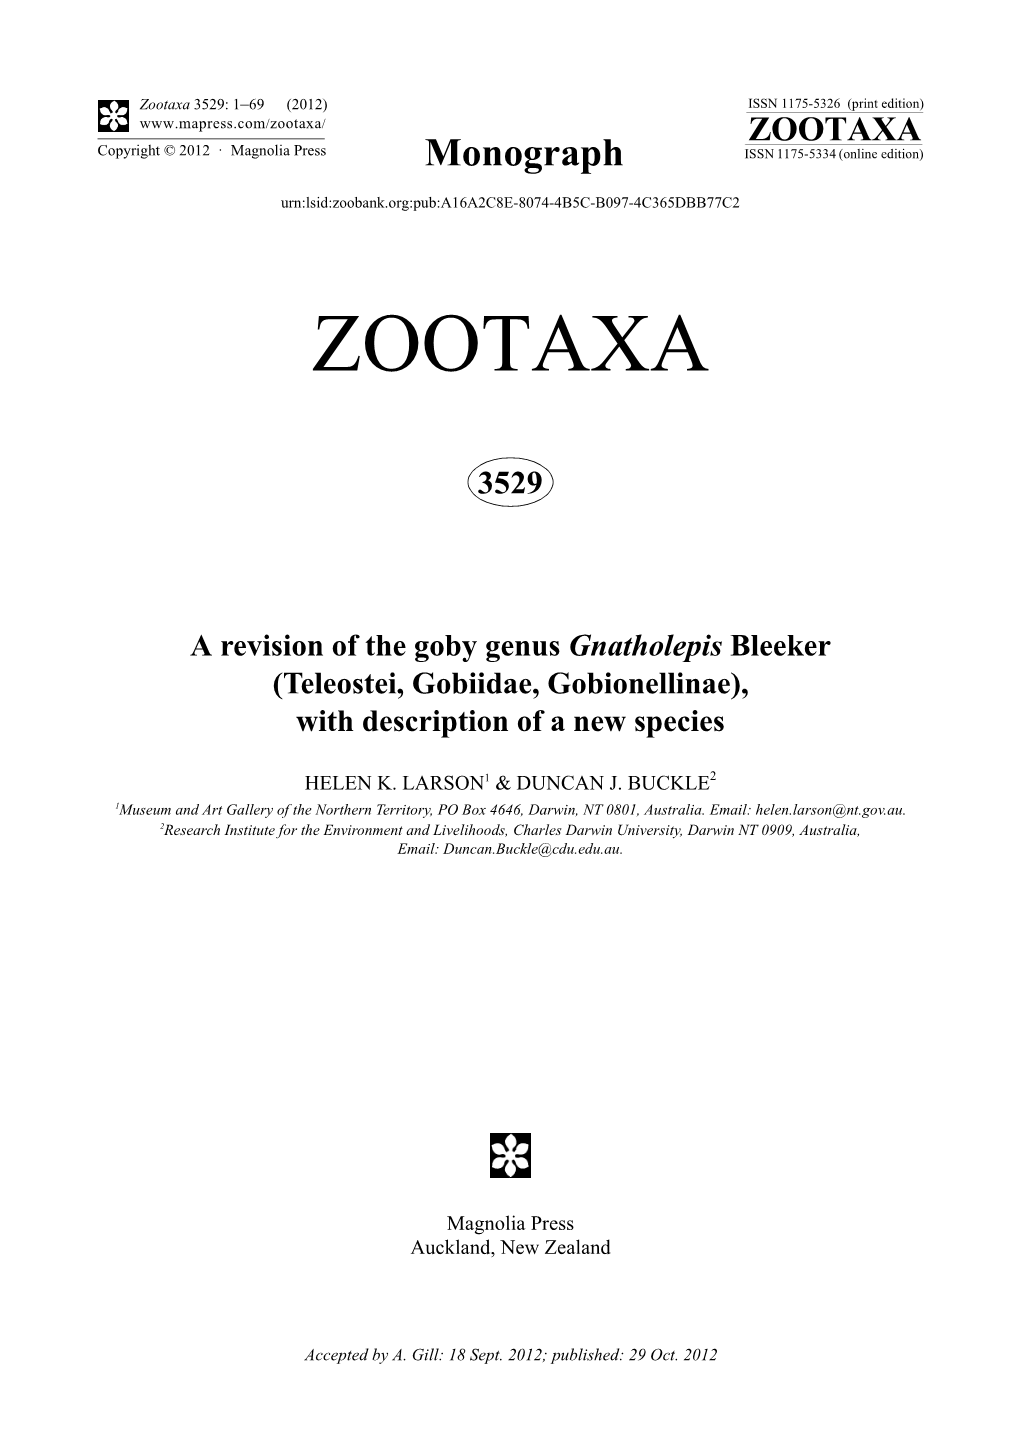 A Revision of the Goby Genus Gnatholepis Bleeker (Teleostei, Gobiidae, Gobionellinae), with Description of a New Species